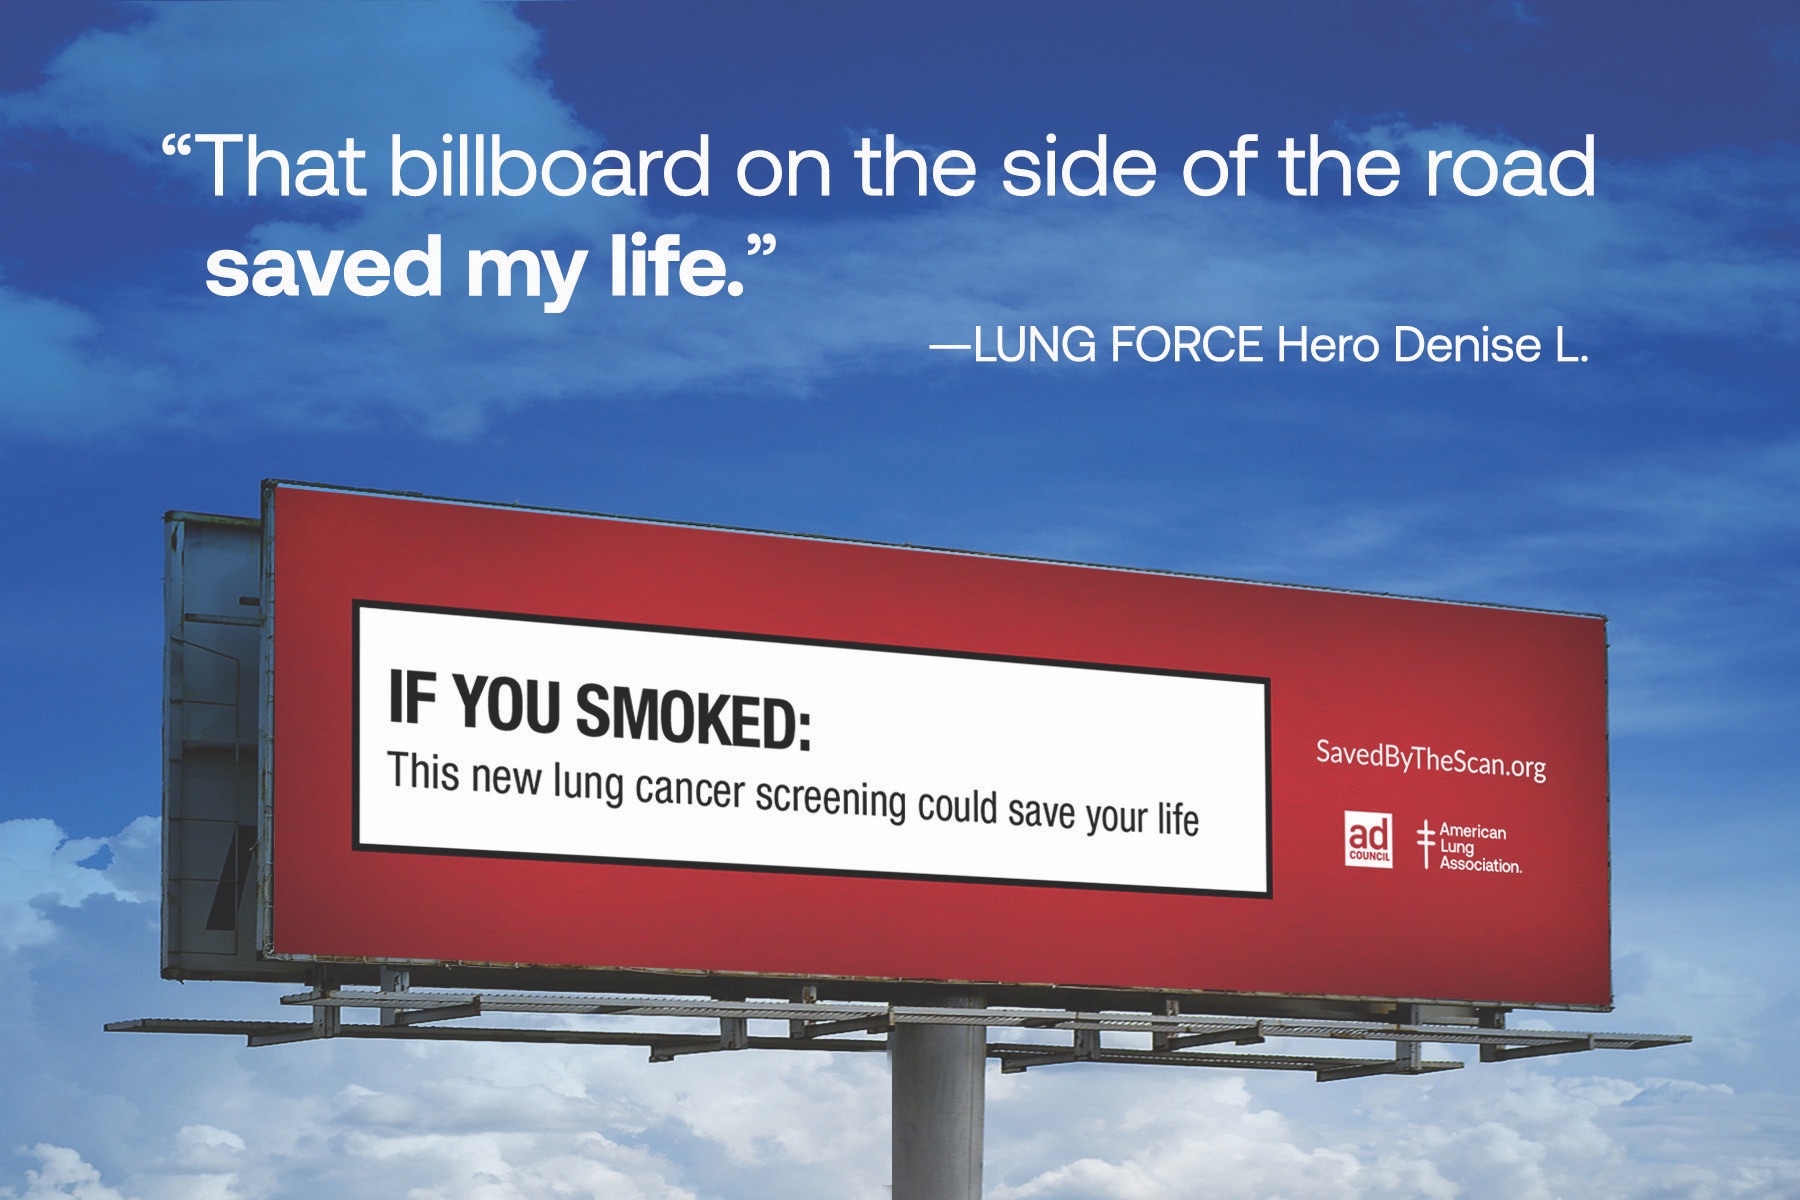 Red billboard with the words 'If You Smoked: This new lung cancer screening could save your life' against a blue sky.